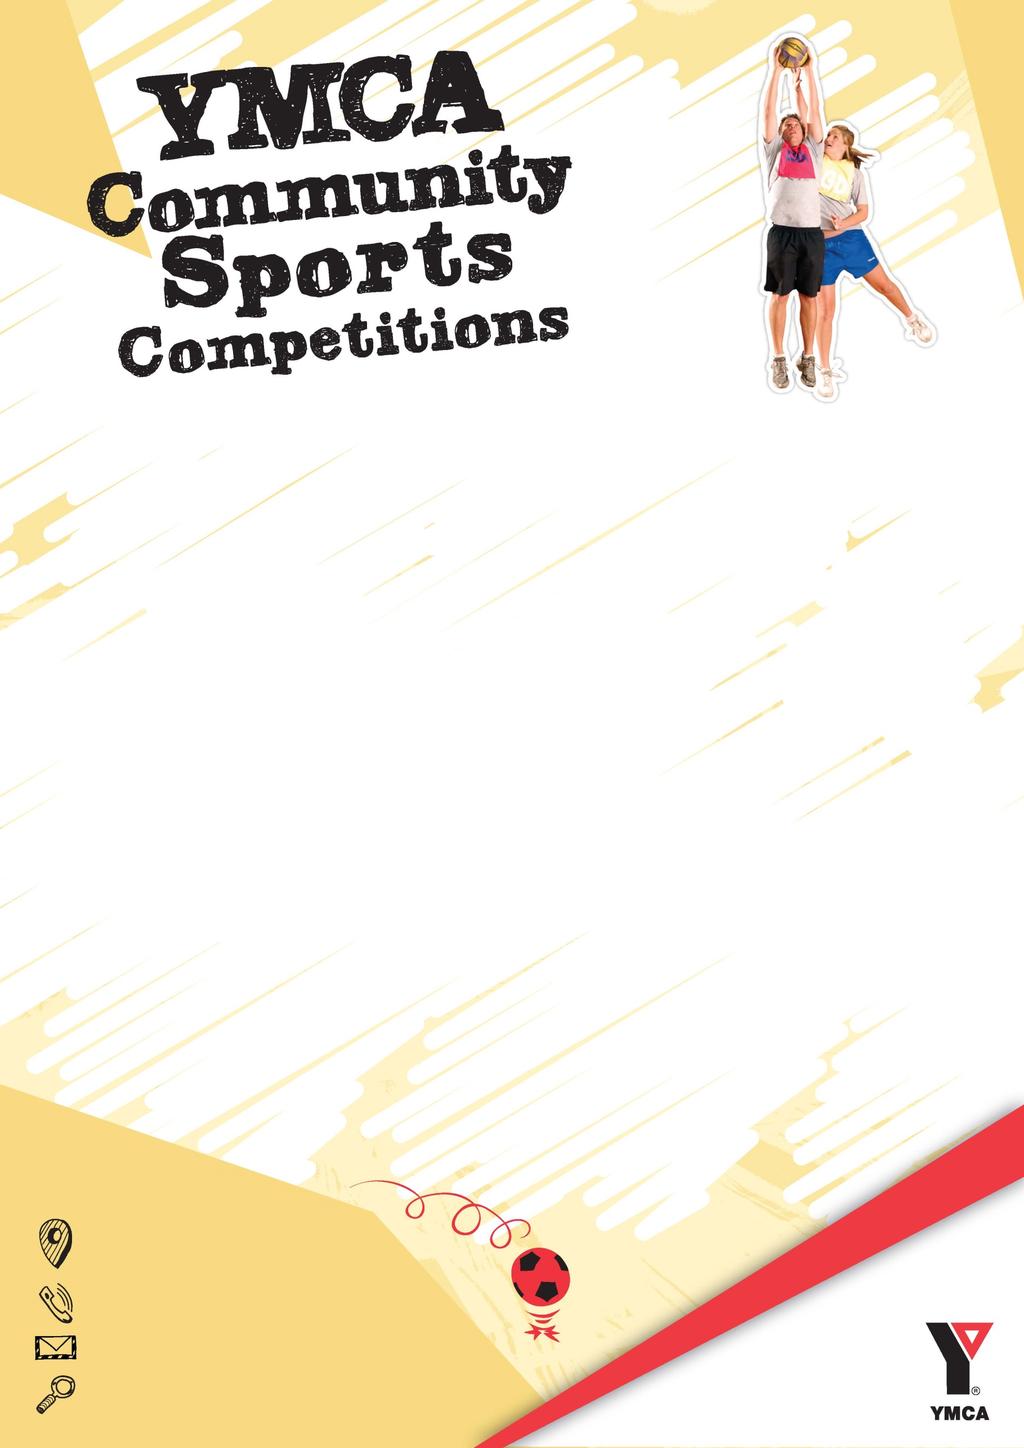 Netball Competition Information Pack Welcome and thank you for choosing the YMCA indoor sports competitions. Our competitions are professionally run and SERIOUSLY FUN.